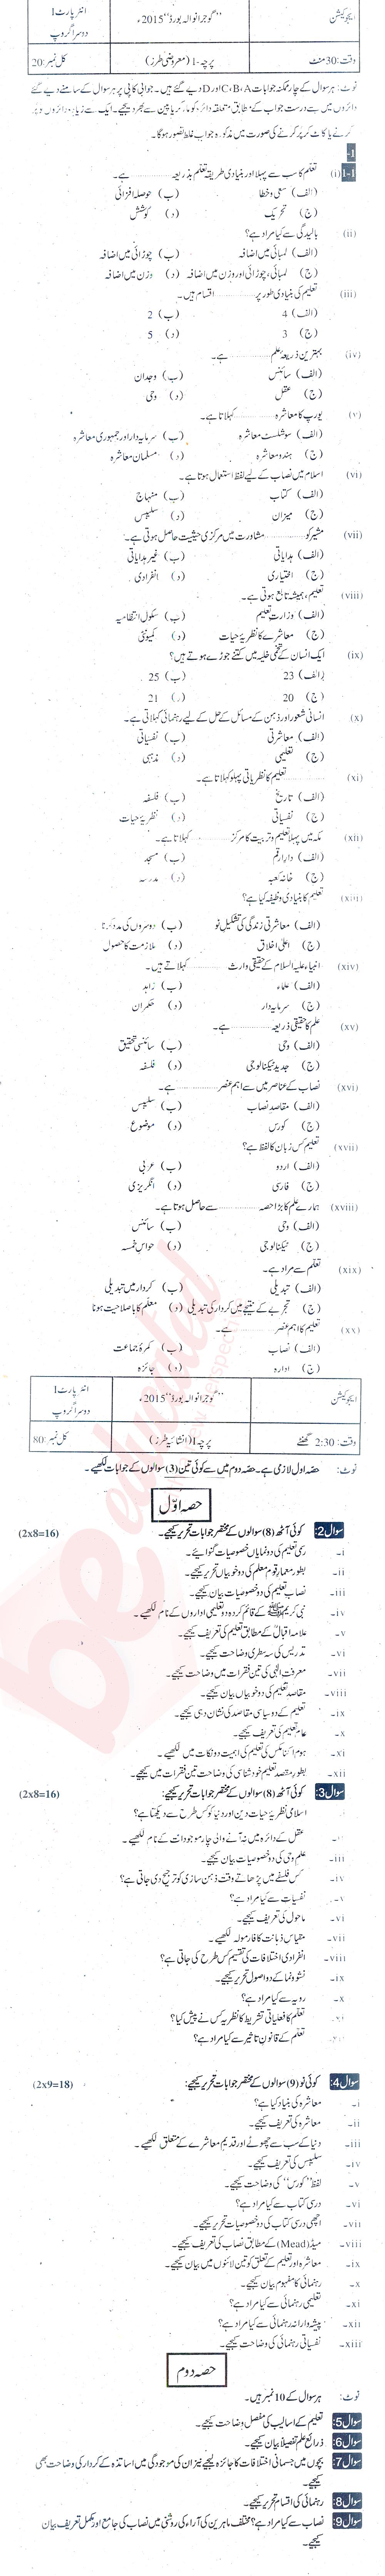 Education FA Part 1 Past Paper Group 2 BISE Gujranwala 2015